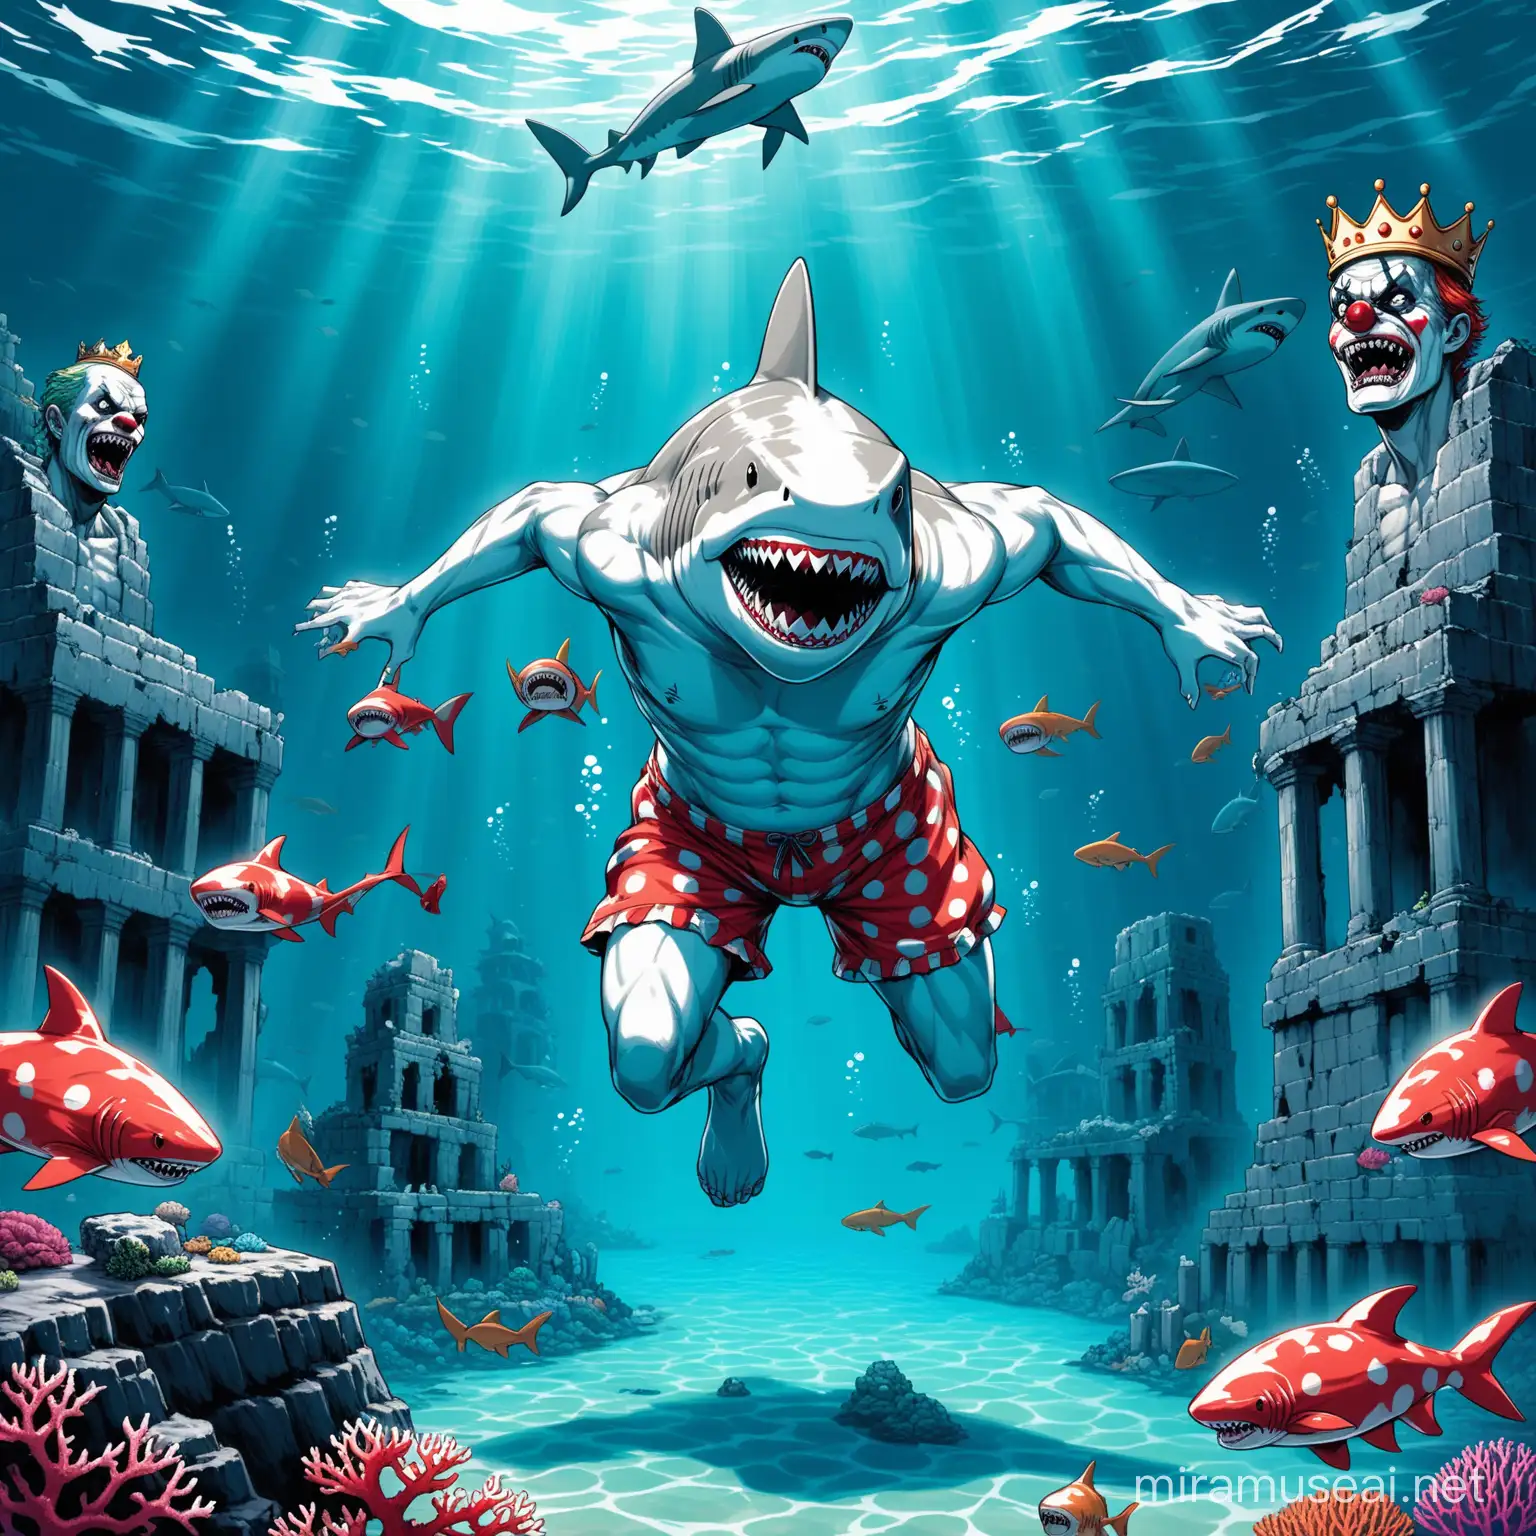 Clown-Shark
appreance- white and silver crown/ full body/ close up //scary/pointed teeth/ humanoid body/ hairless/ swim trunks/albino/ musclar/cool/
background- under water/scared fish/blood/ coral reef/ ocean noir/underwater ruins/statues